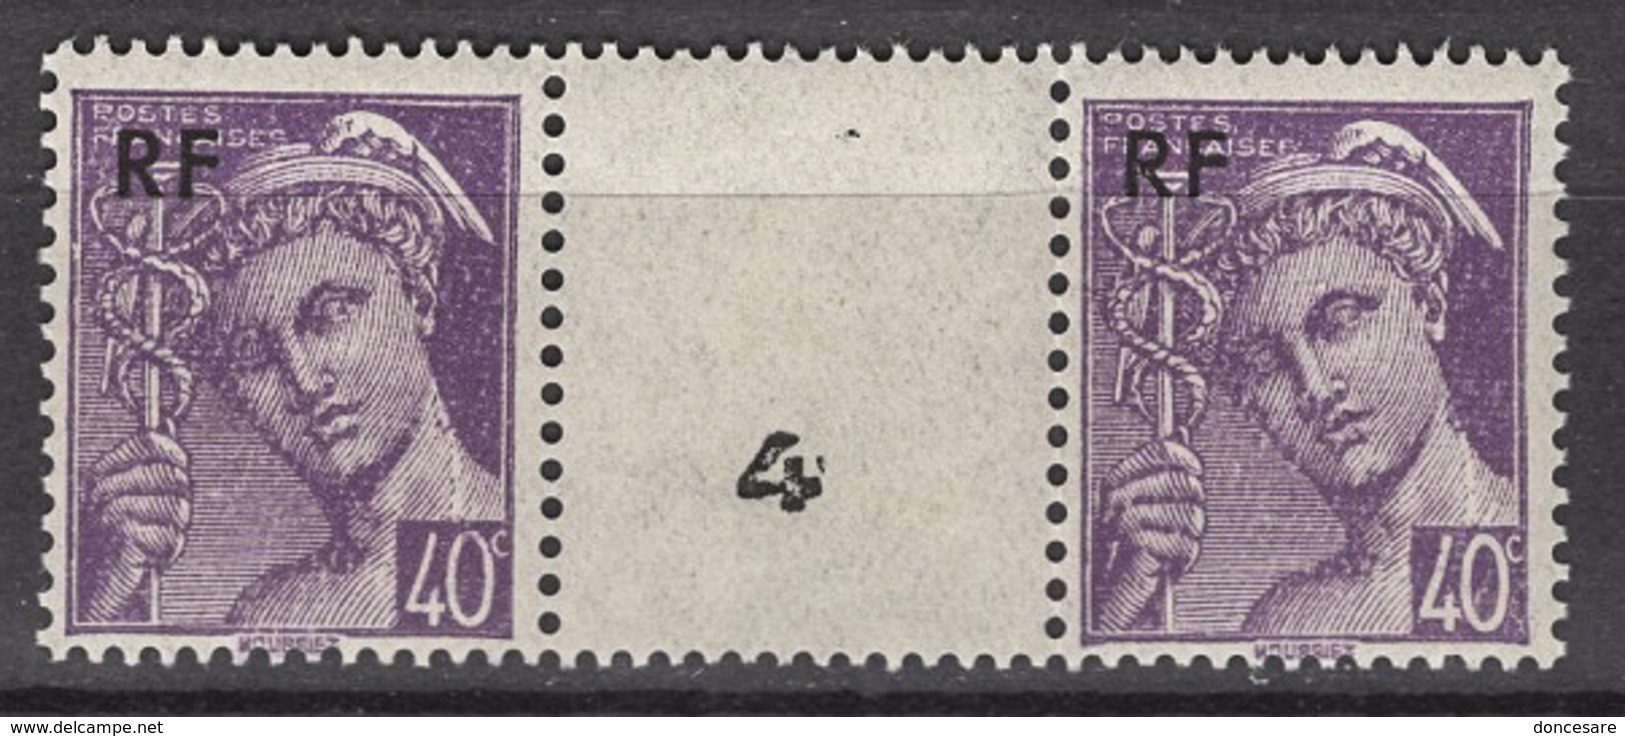 FRANCE 1944 - PAIRE Y.T. N° 659  - NEUFS** B7 - Nuovi